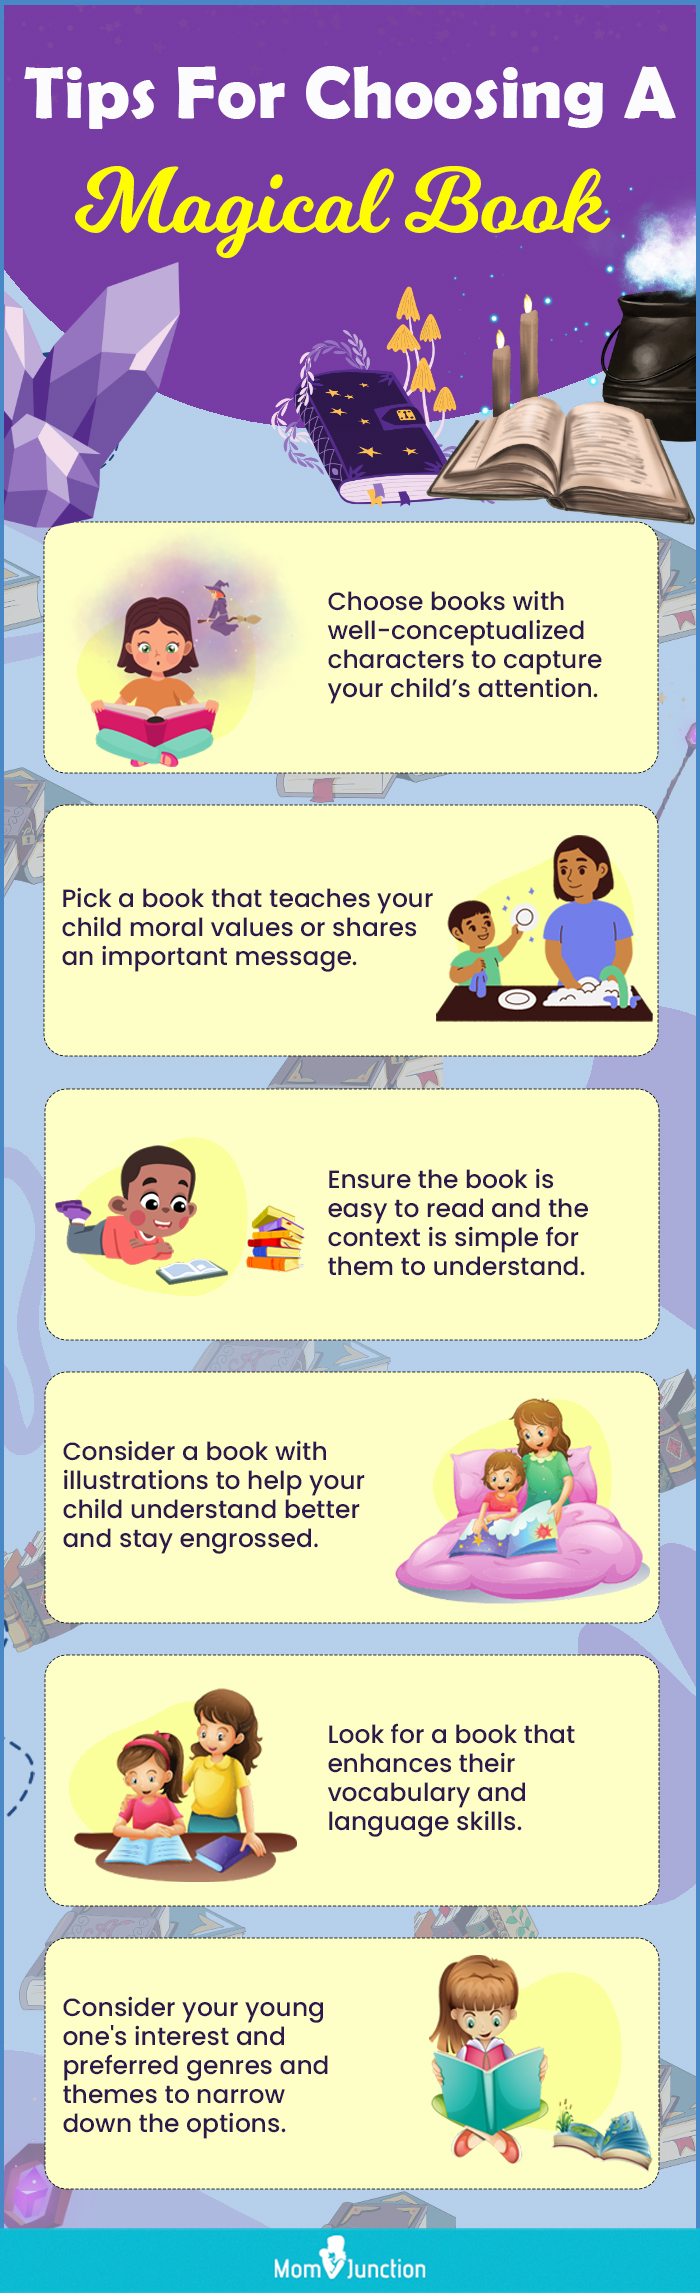 Tips For Choosing A Magical Book [infographic]